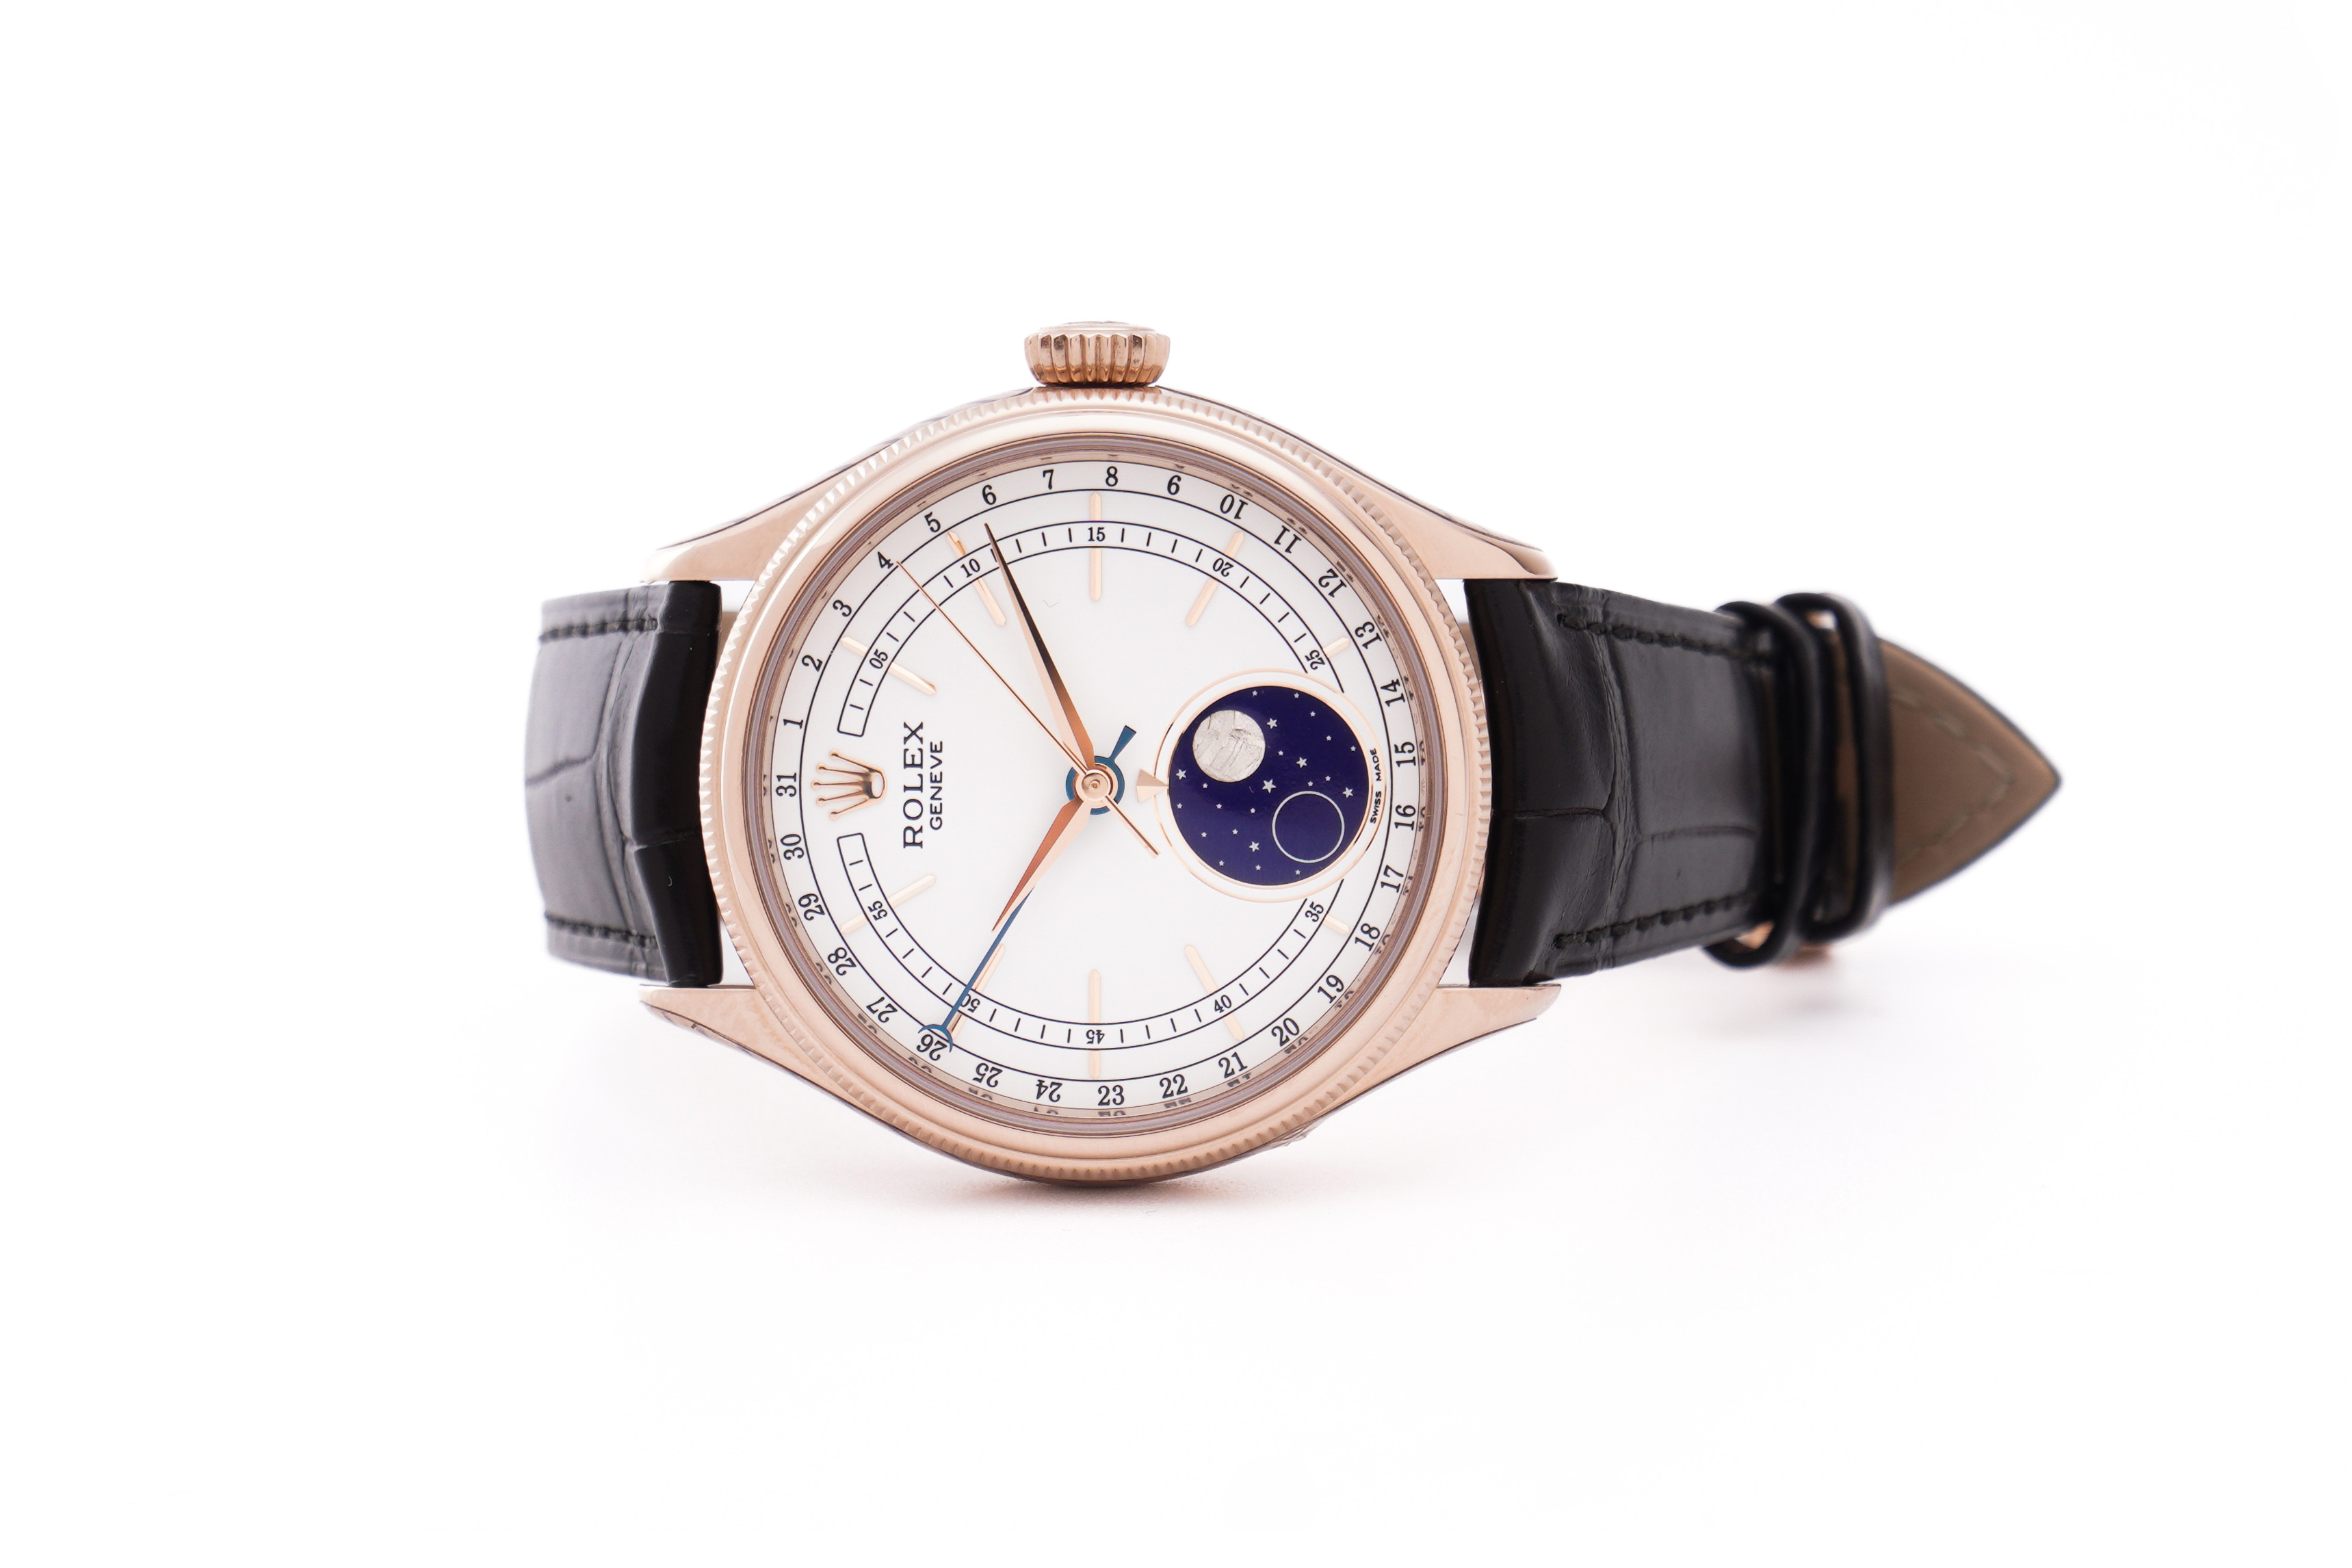 Đồng Hồ Rolex Cellini Moonphase 50535 (GBPC)